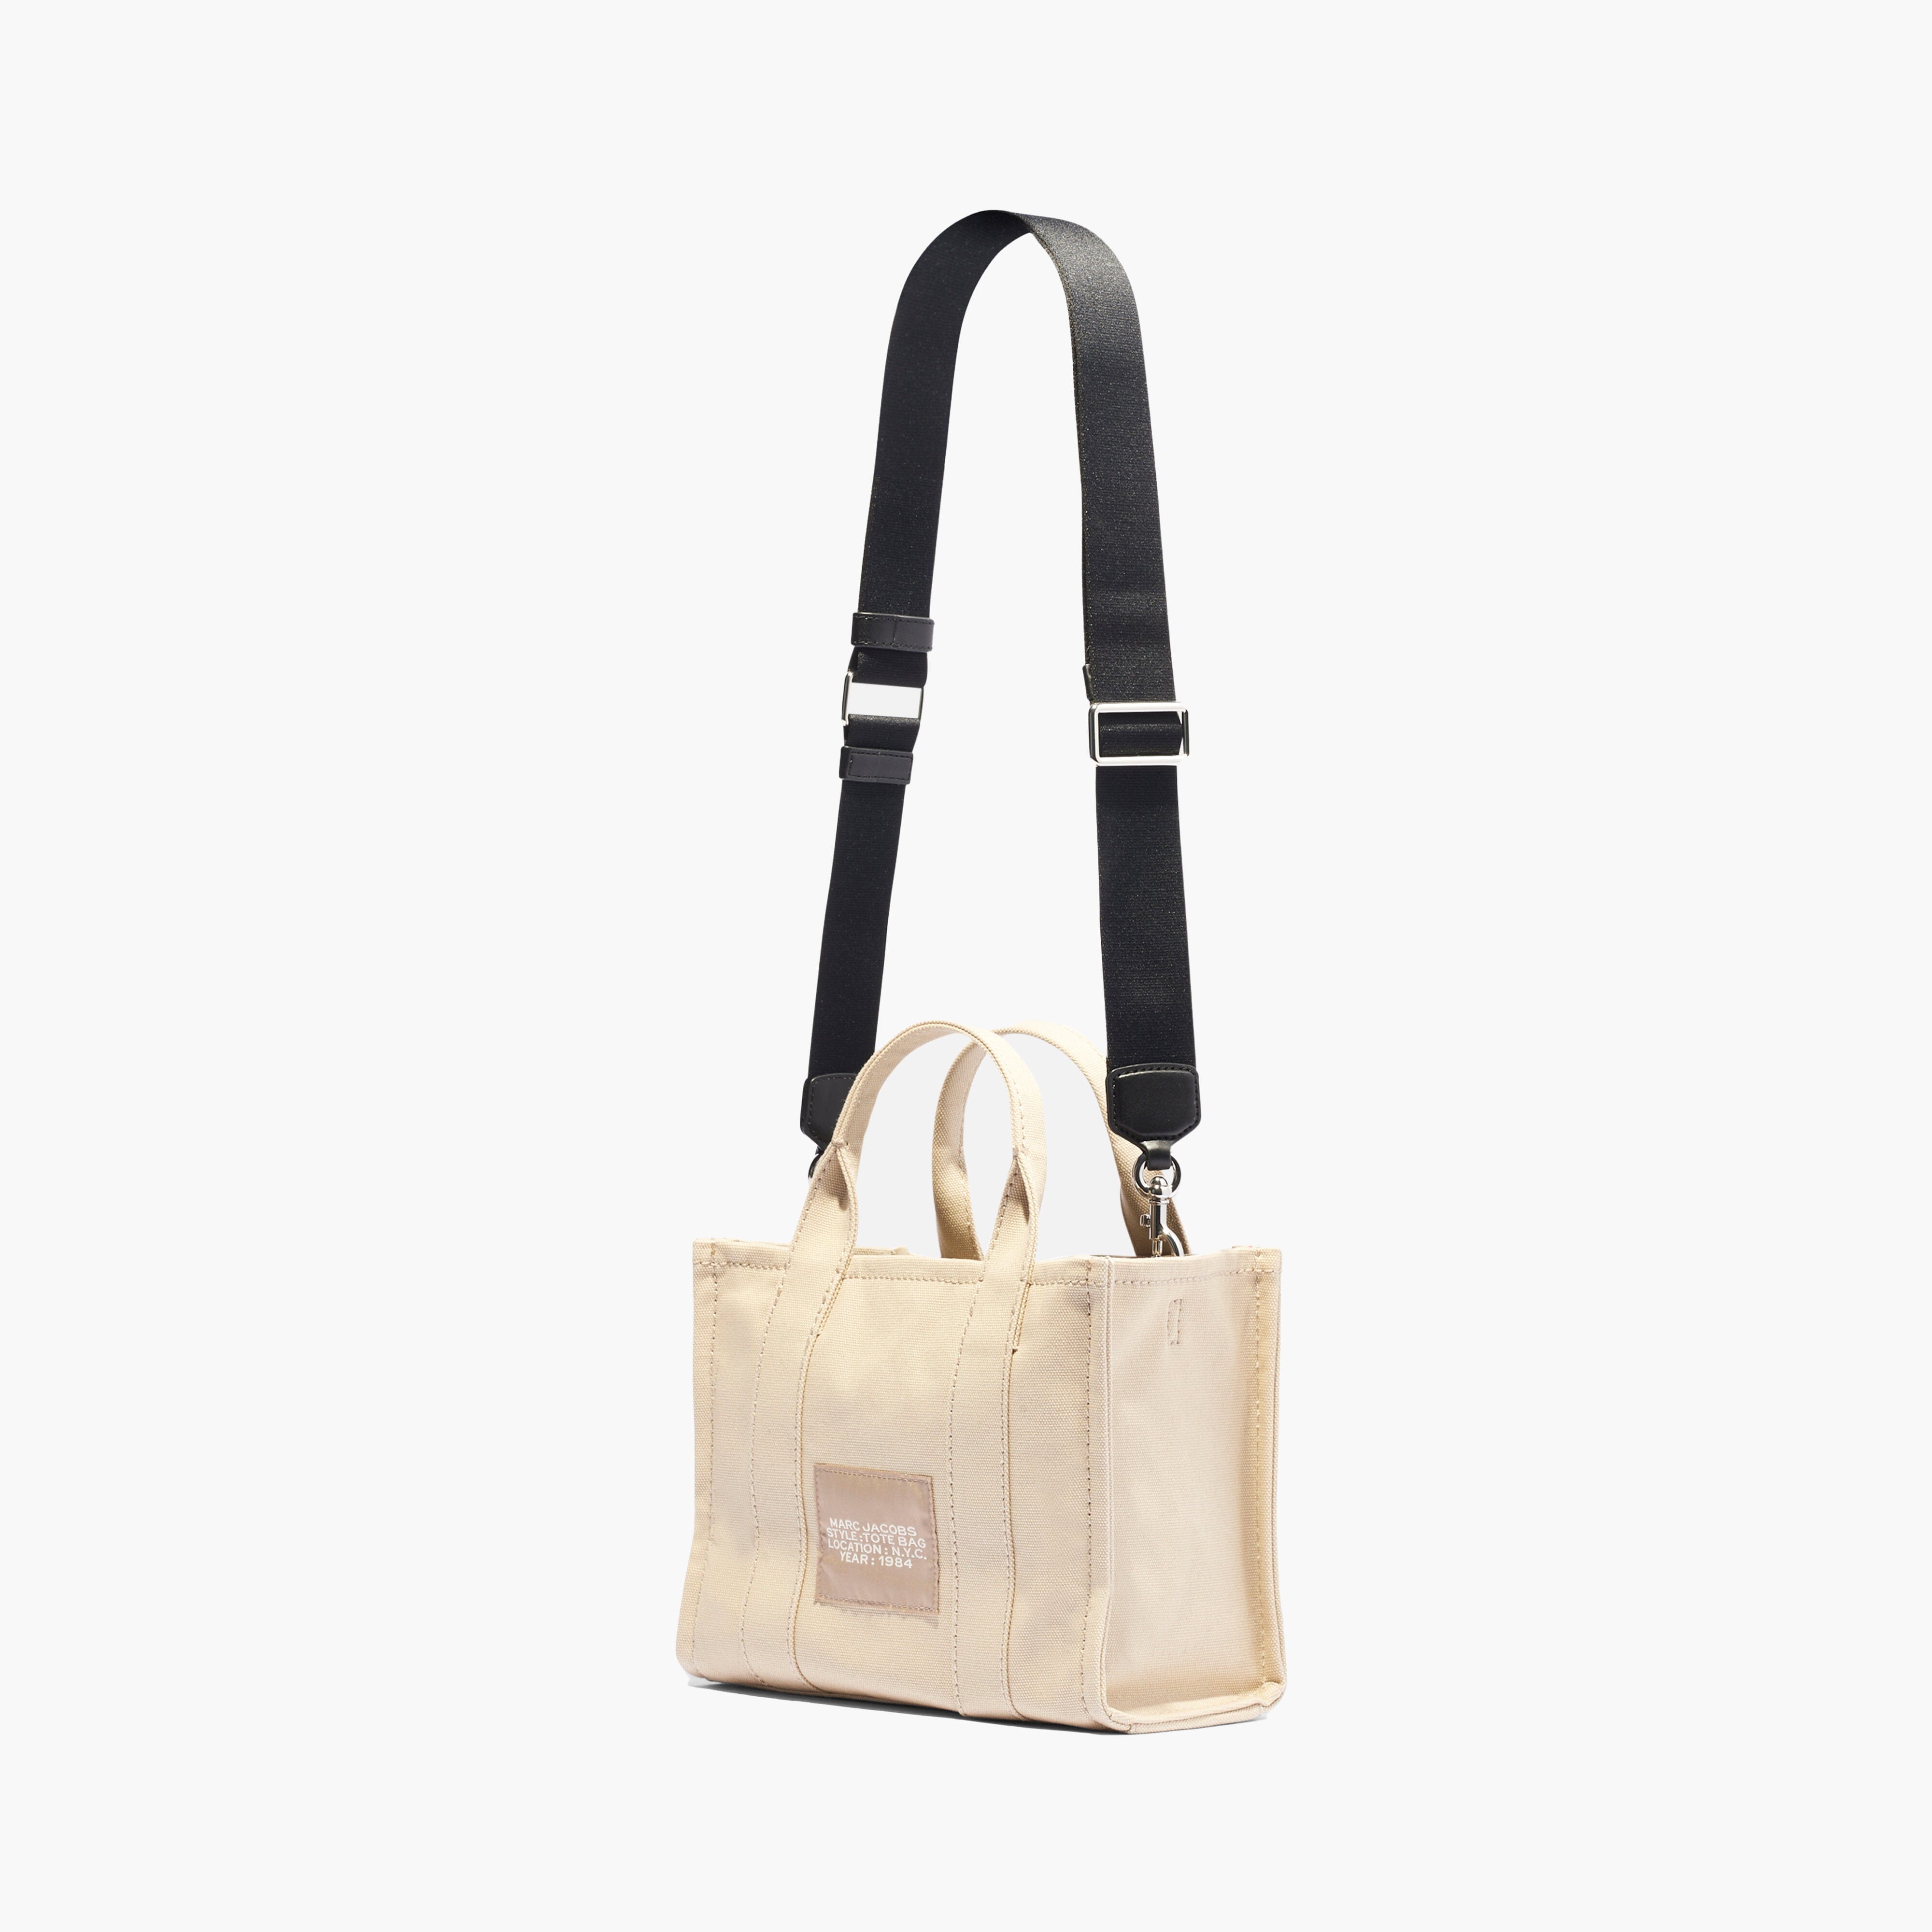 MARC JACOBS - M0016493-260 - The Summer Small Tote Bag - Beige Borse Marc Jacobs 